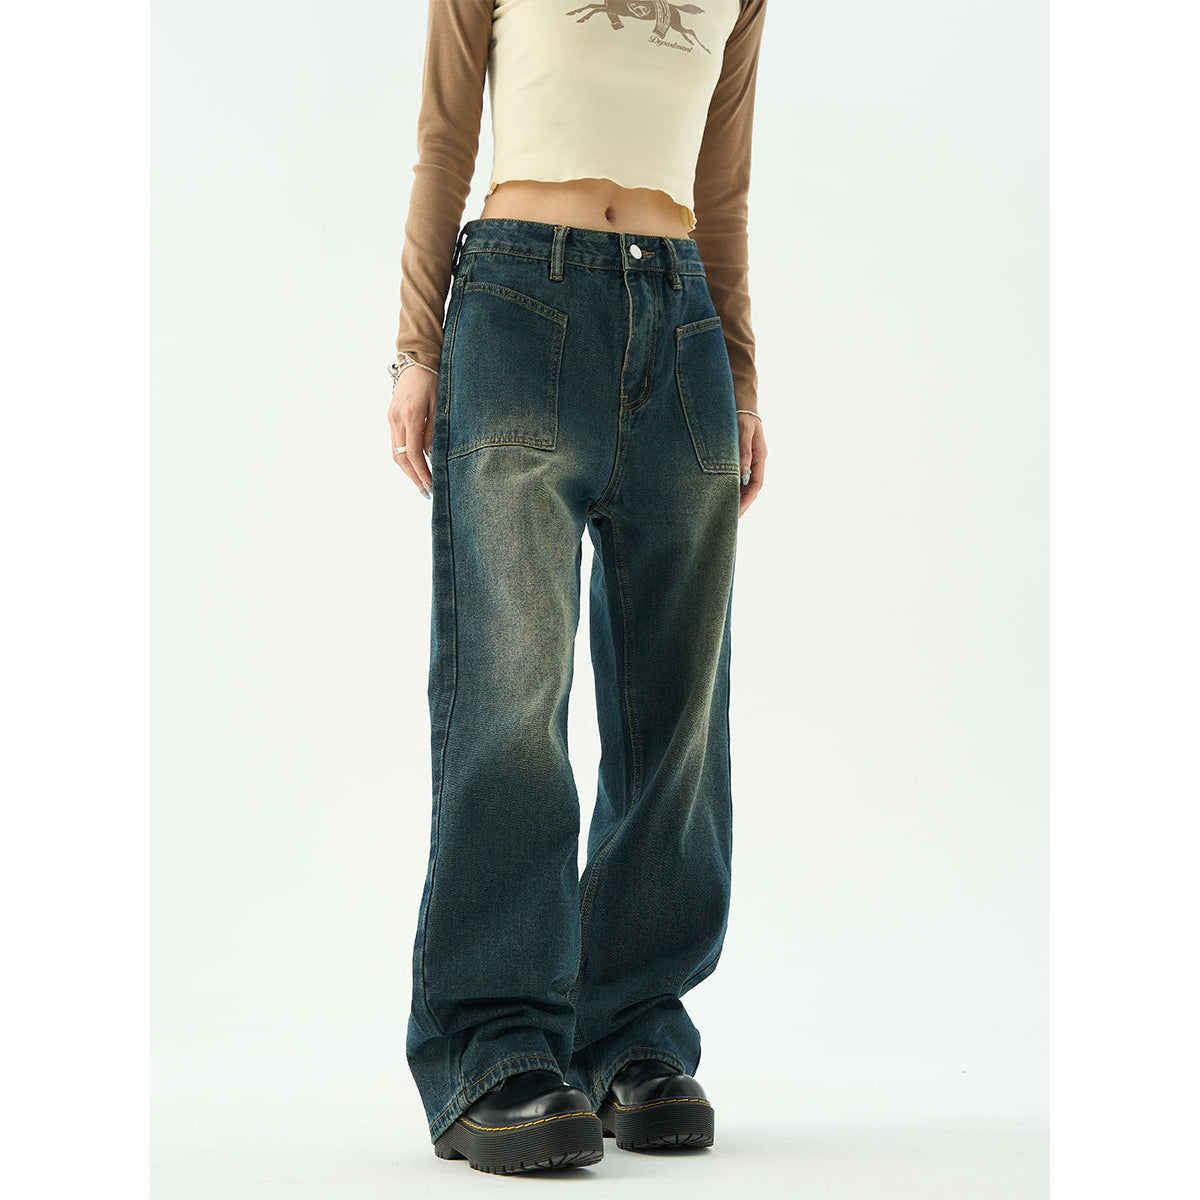 Acid Treated Jeans Korean Street Fashion Jeans By 77Flight Shop Online at OH Vault